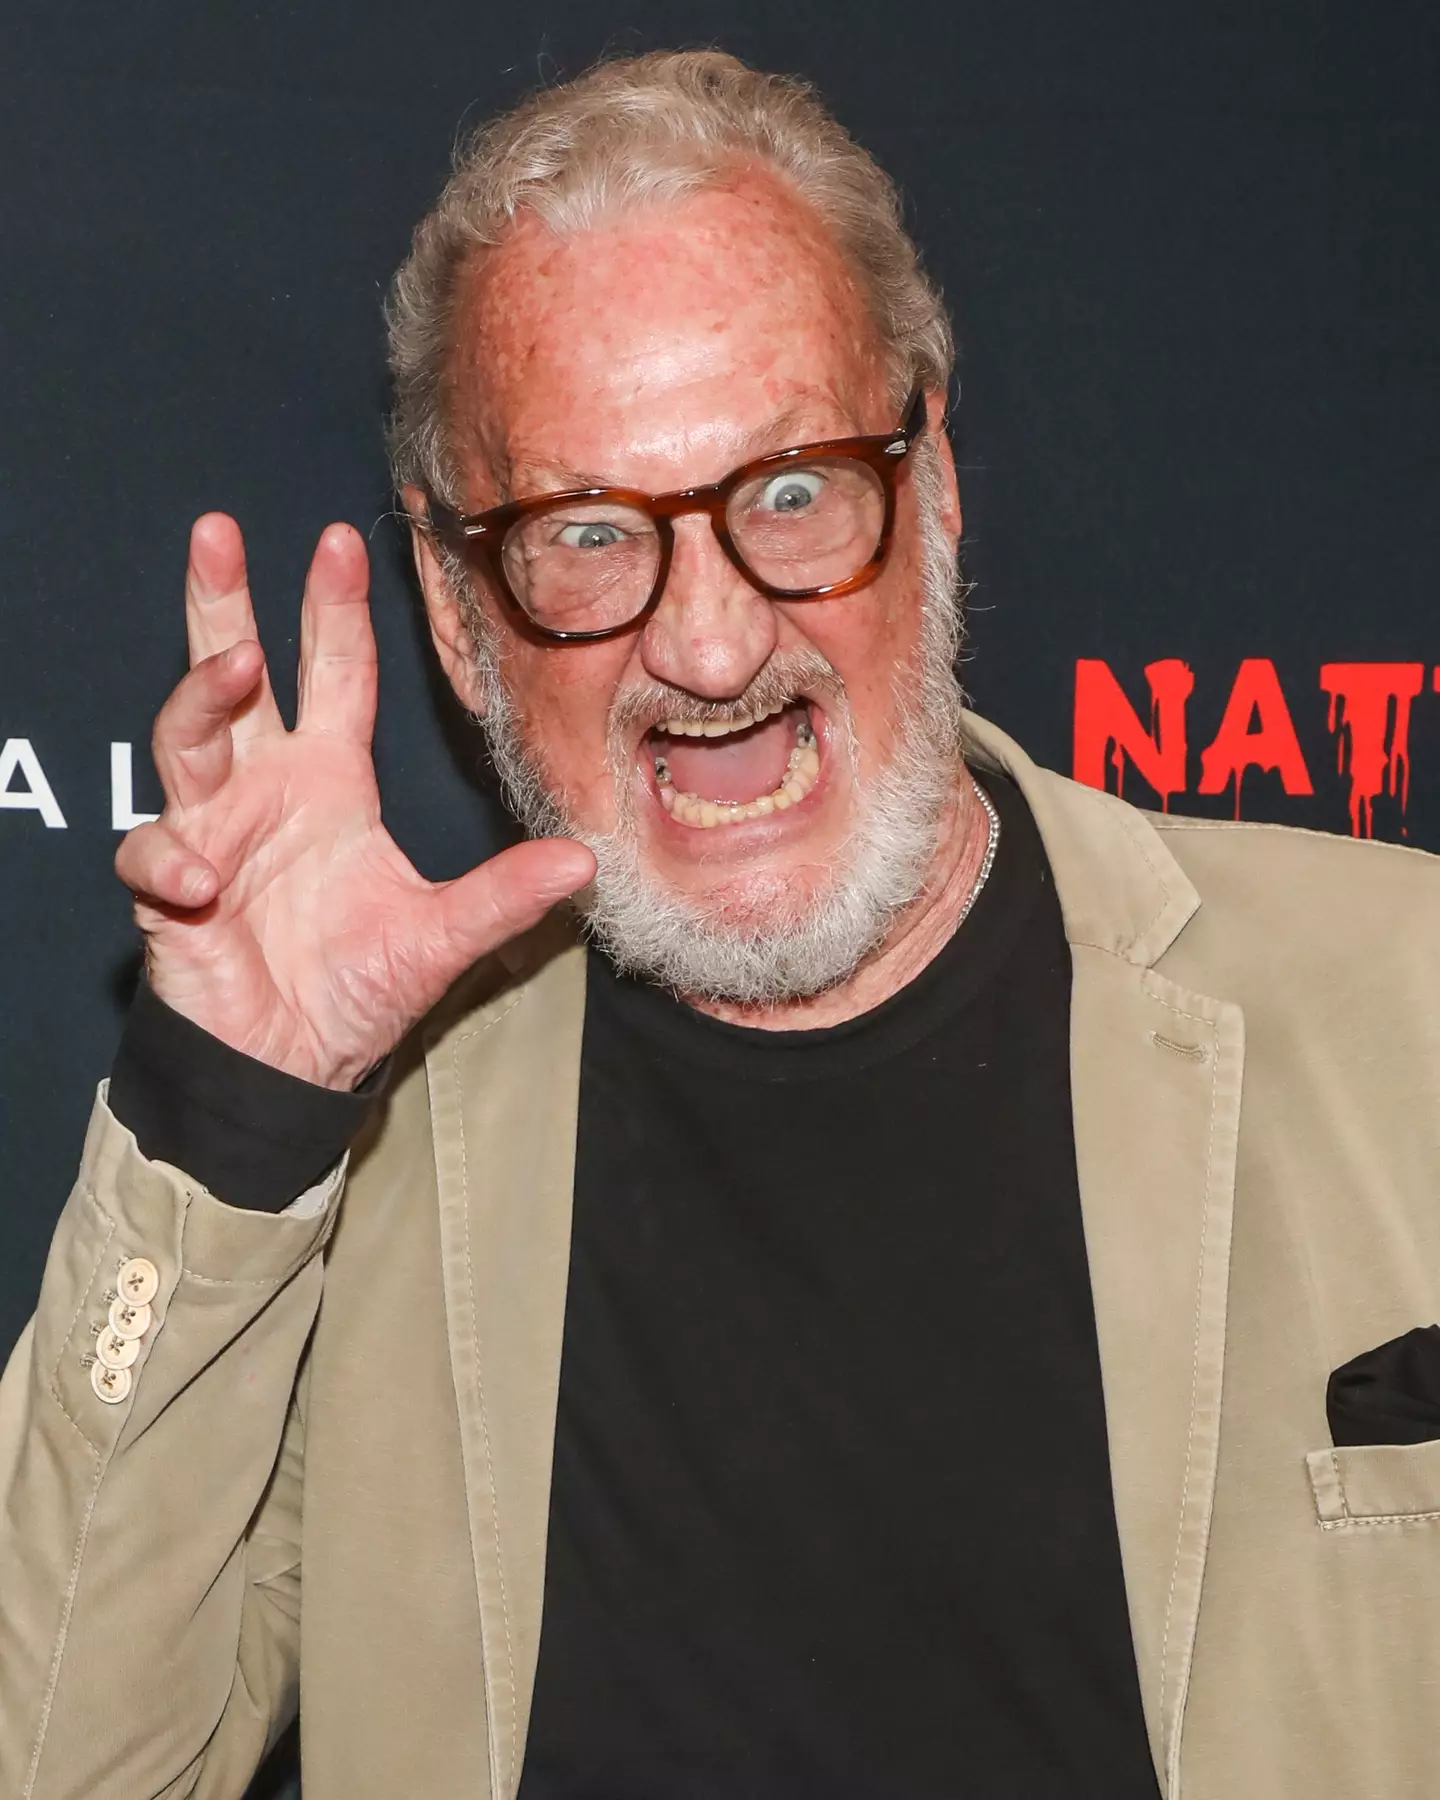 Robert Englund played the iconic role in several appearances.